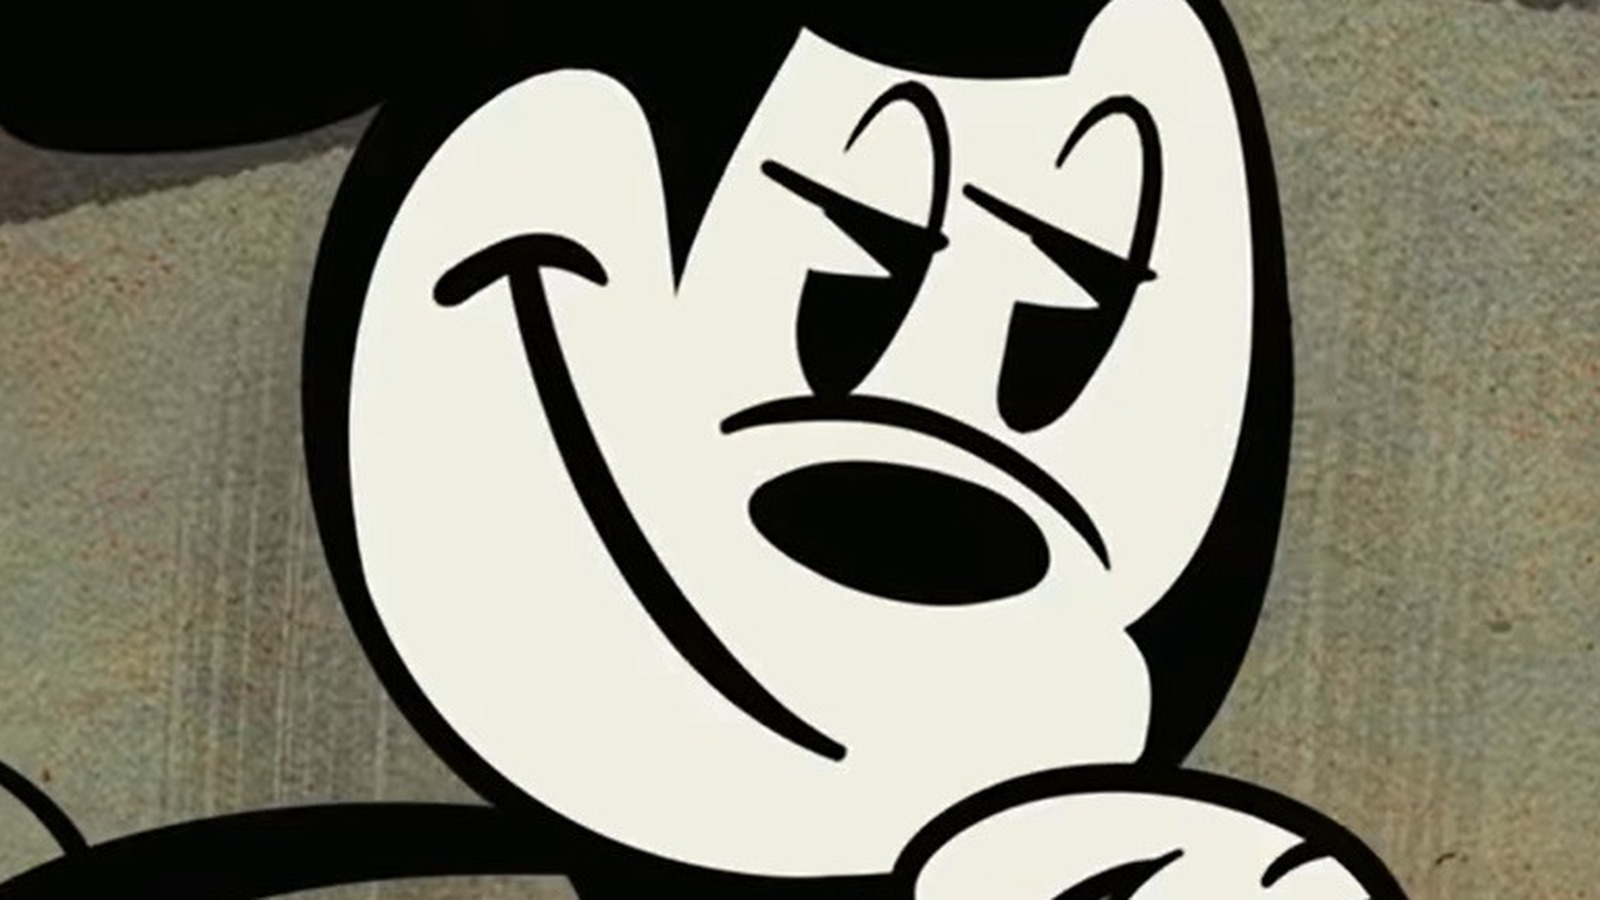 Walt Disney's first drawing of Mickey Mouse (circa 1932) : r/fakehistoryporn